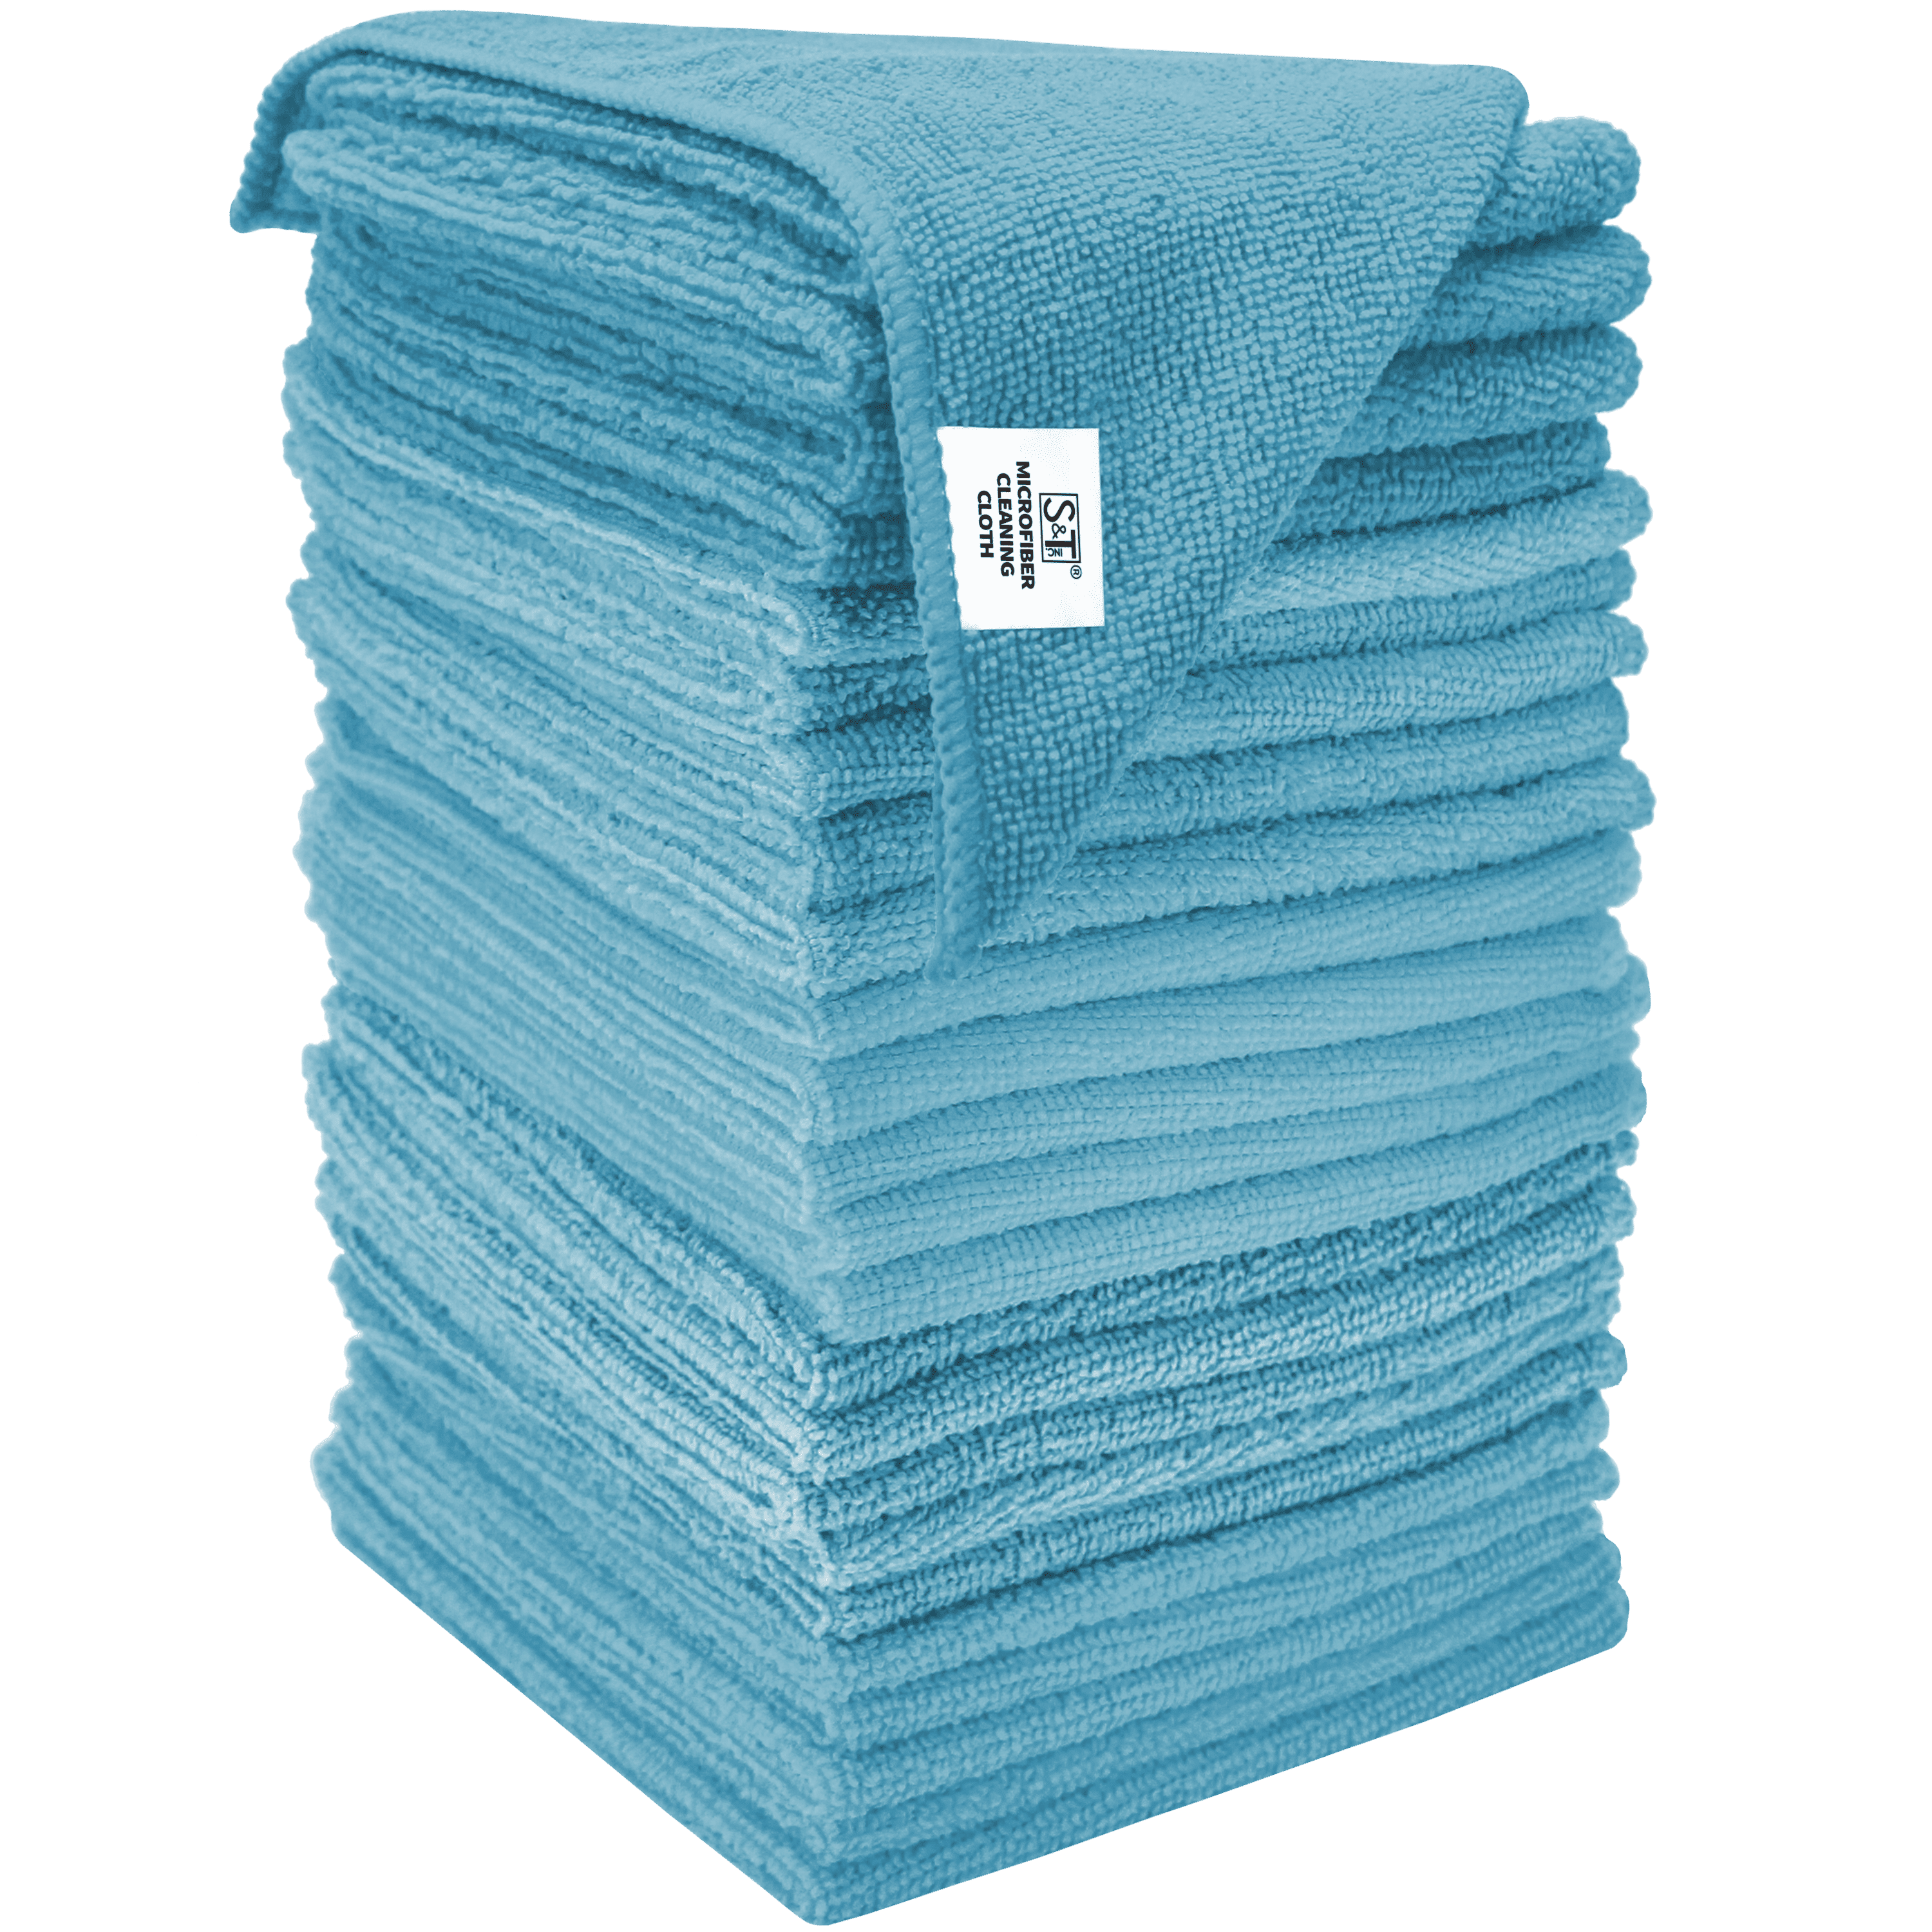 FIXSMITH Microfiber Cleaning Cloth Pack of 8 All-Purpose Cleaning Towels Si... 